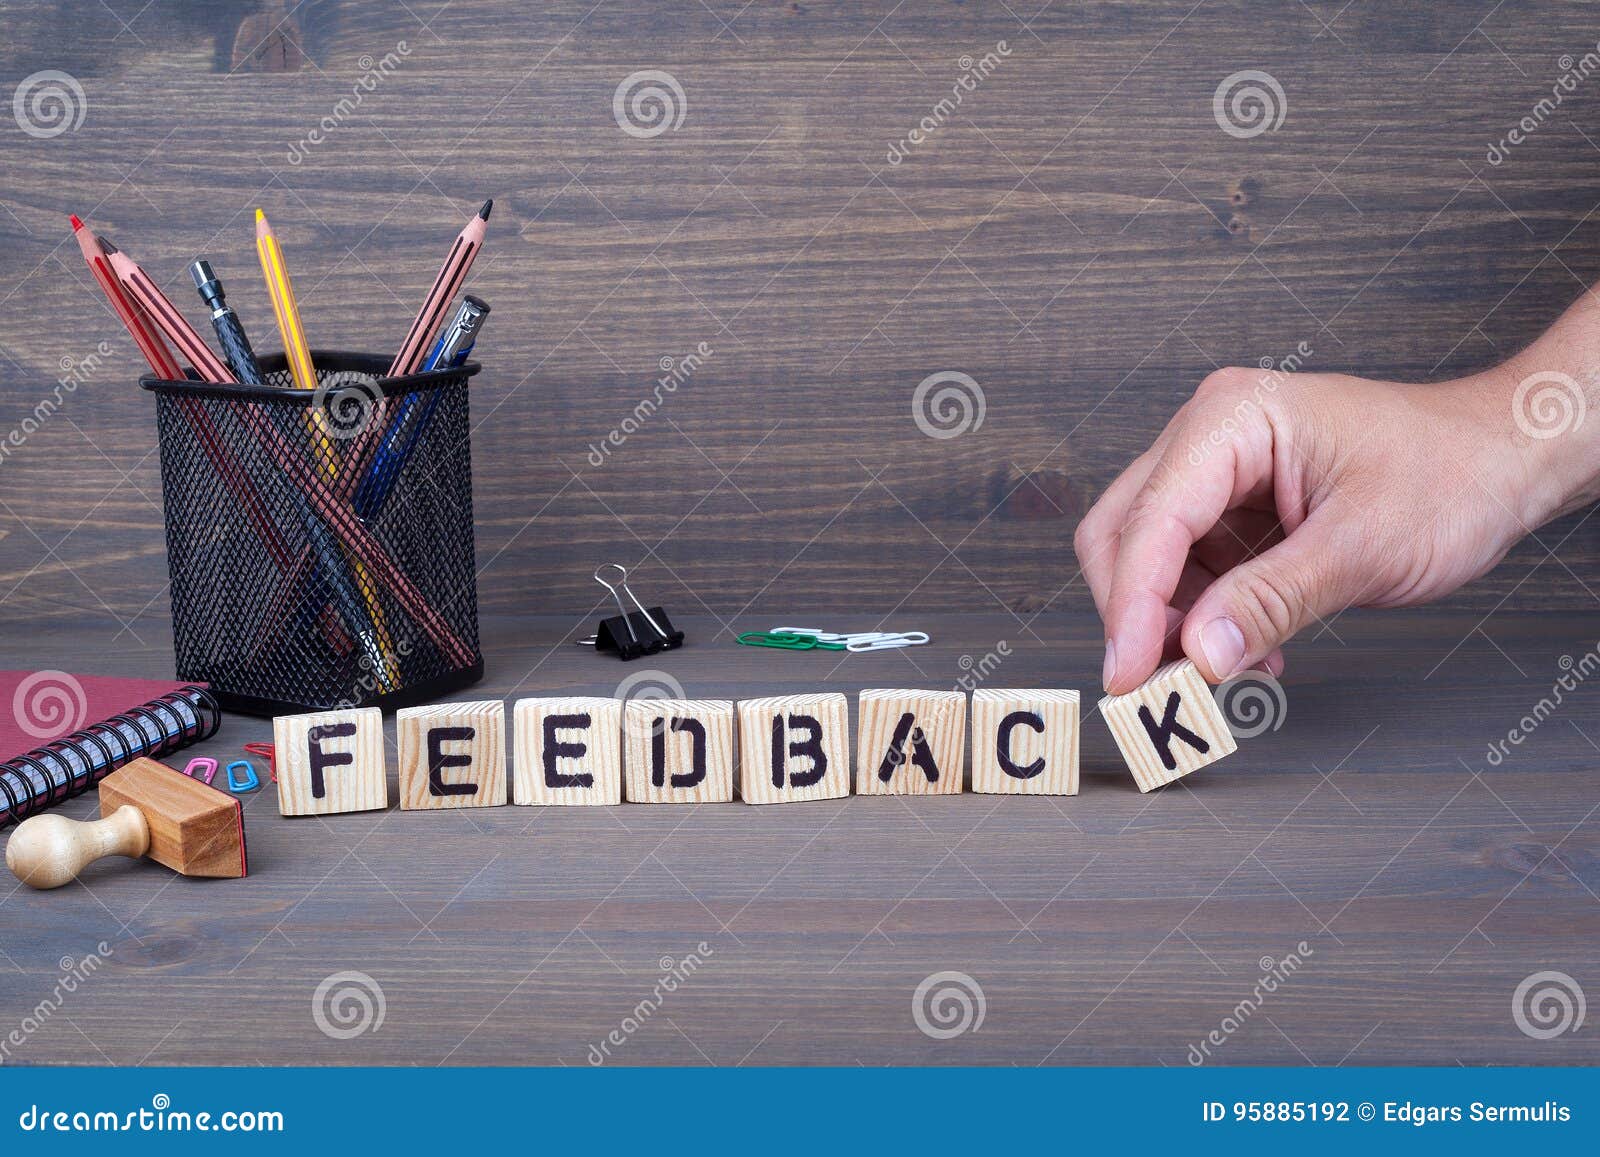 Feedback. Wooden Letters on Dark Background Stock Photo - Image of idea,  hand: 95885192